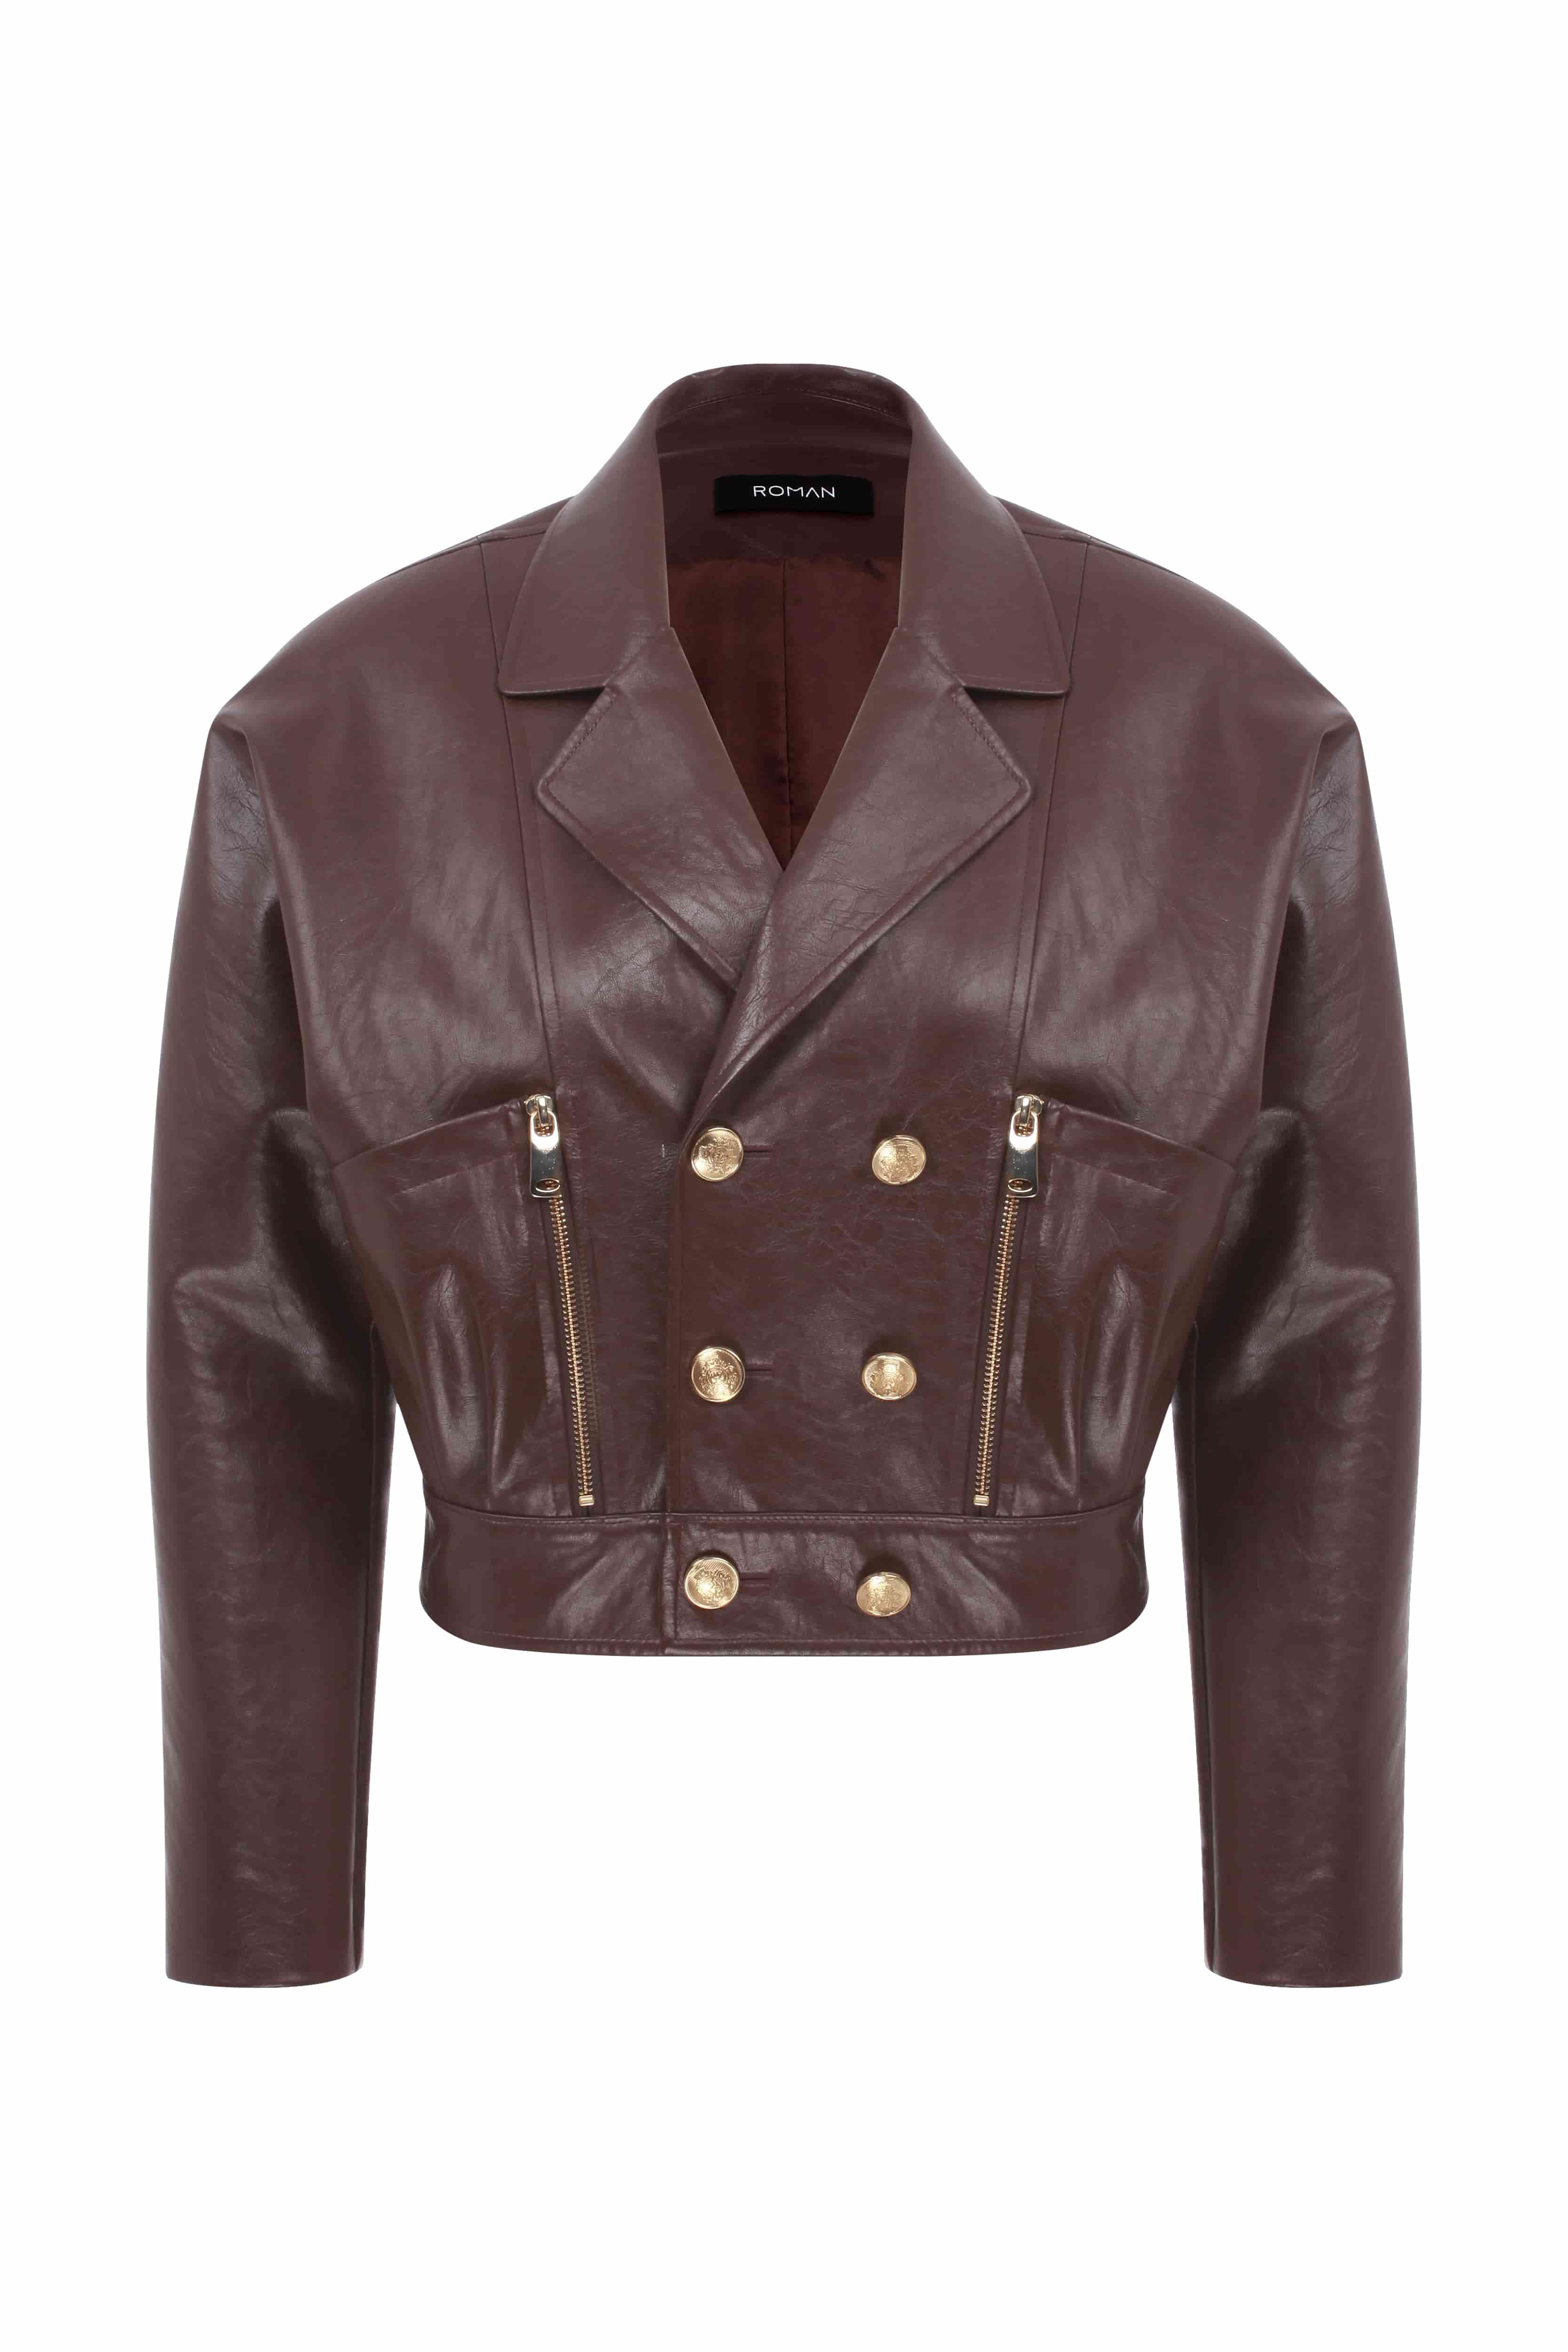 Roman Brown Leather Jacket With Gold Button. 2